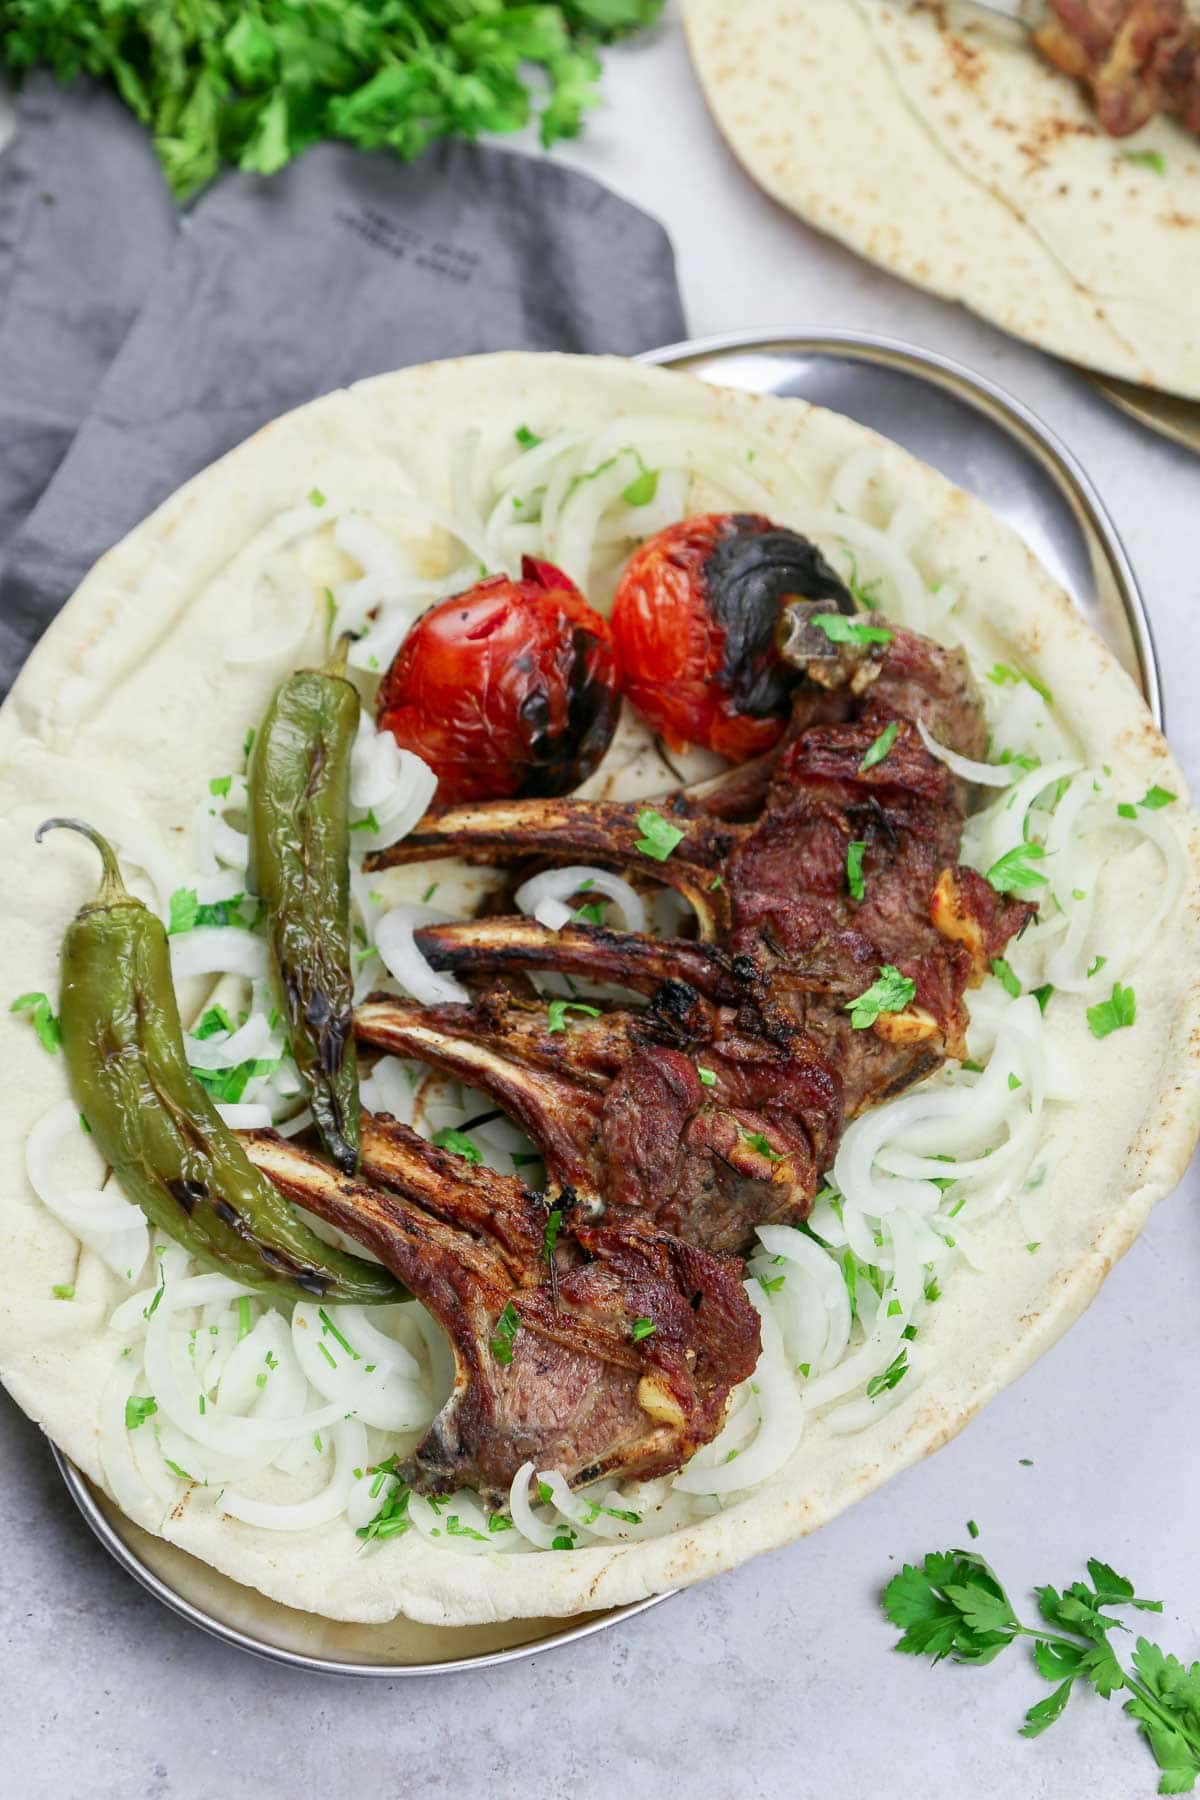 Grilled lamb ribs served over pita bread, sliced white onions, and charred tomatoes and chili peppers